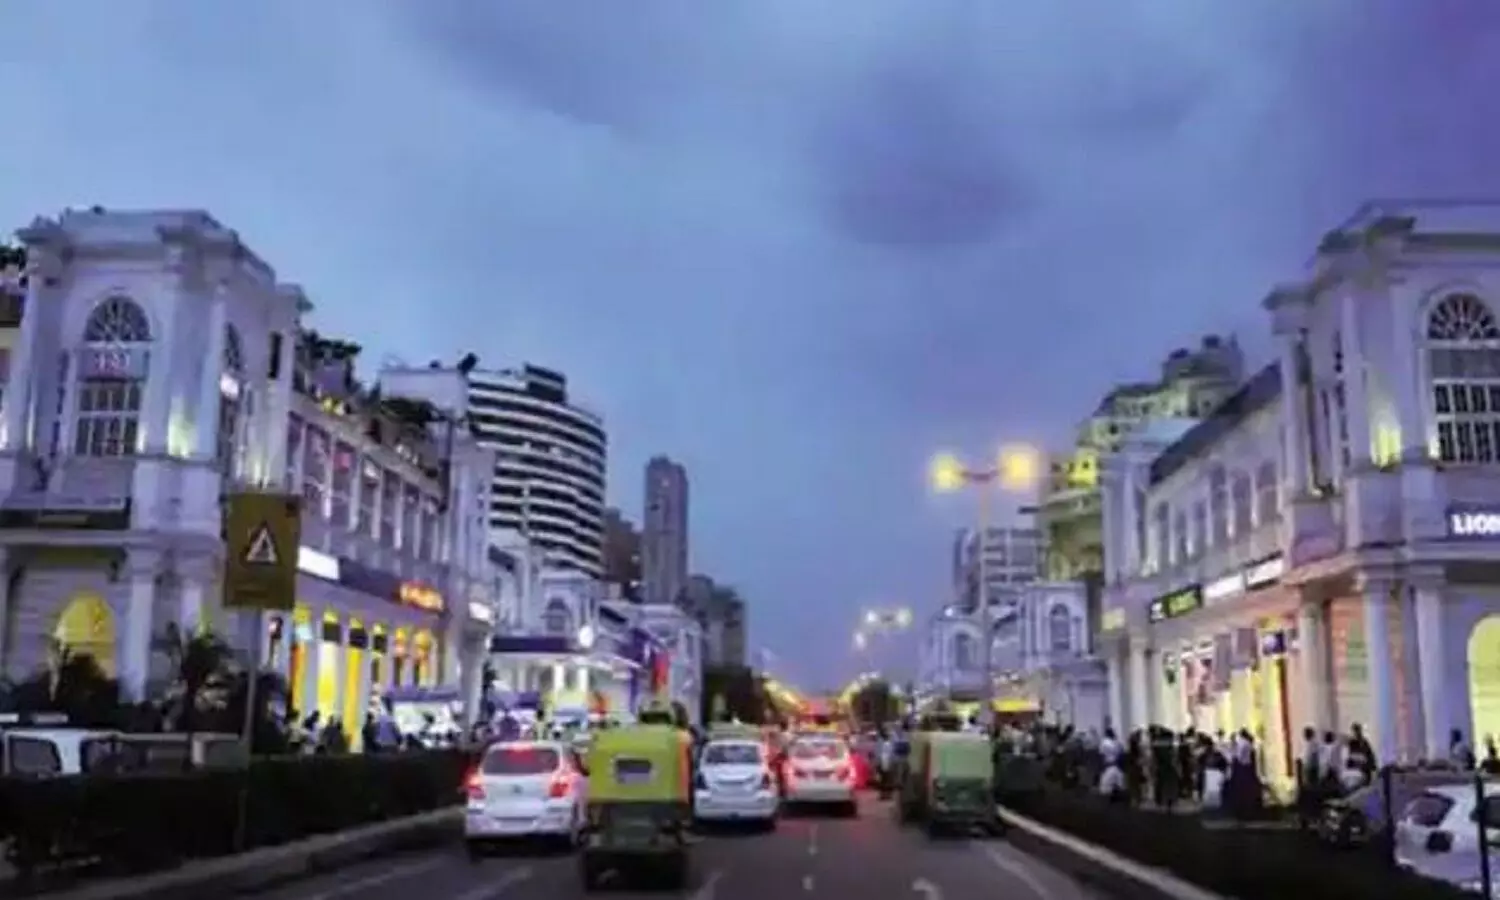 Delhi traffic police alert entry ban in Connaught place during new year evening after 8 pm night